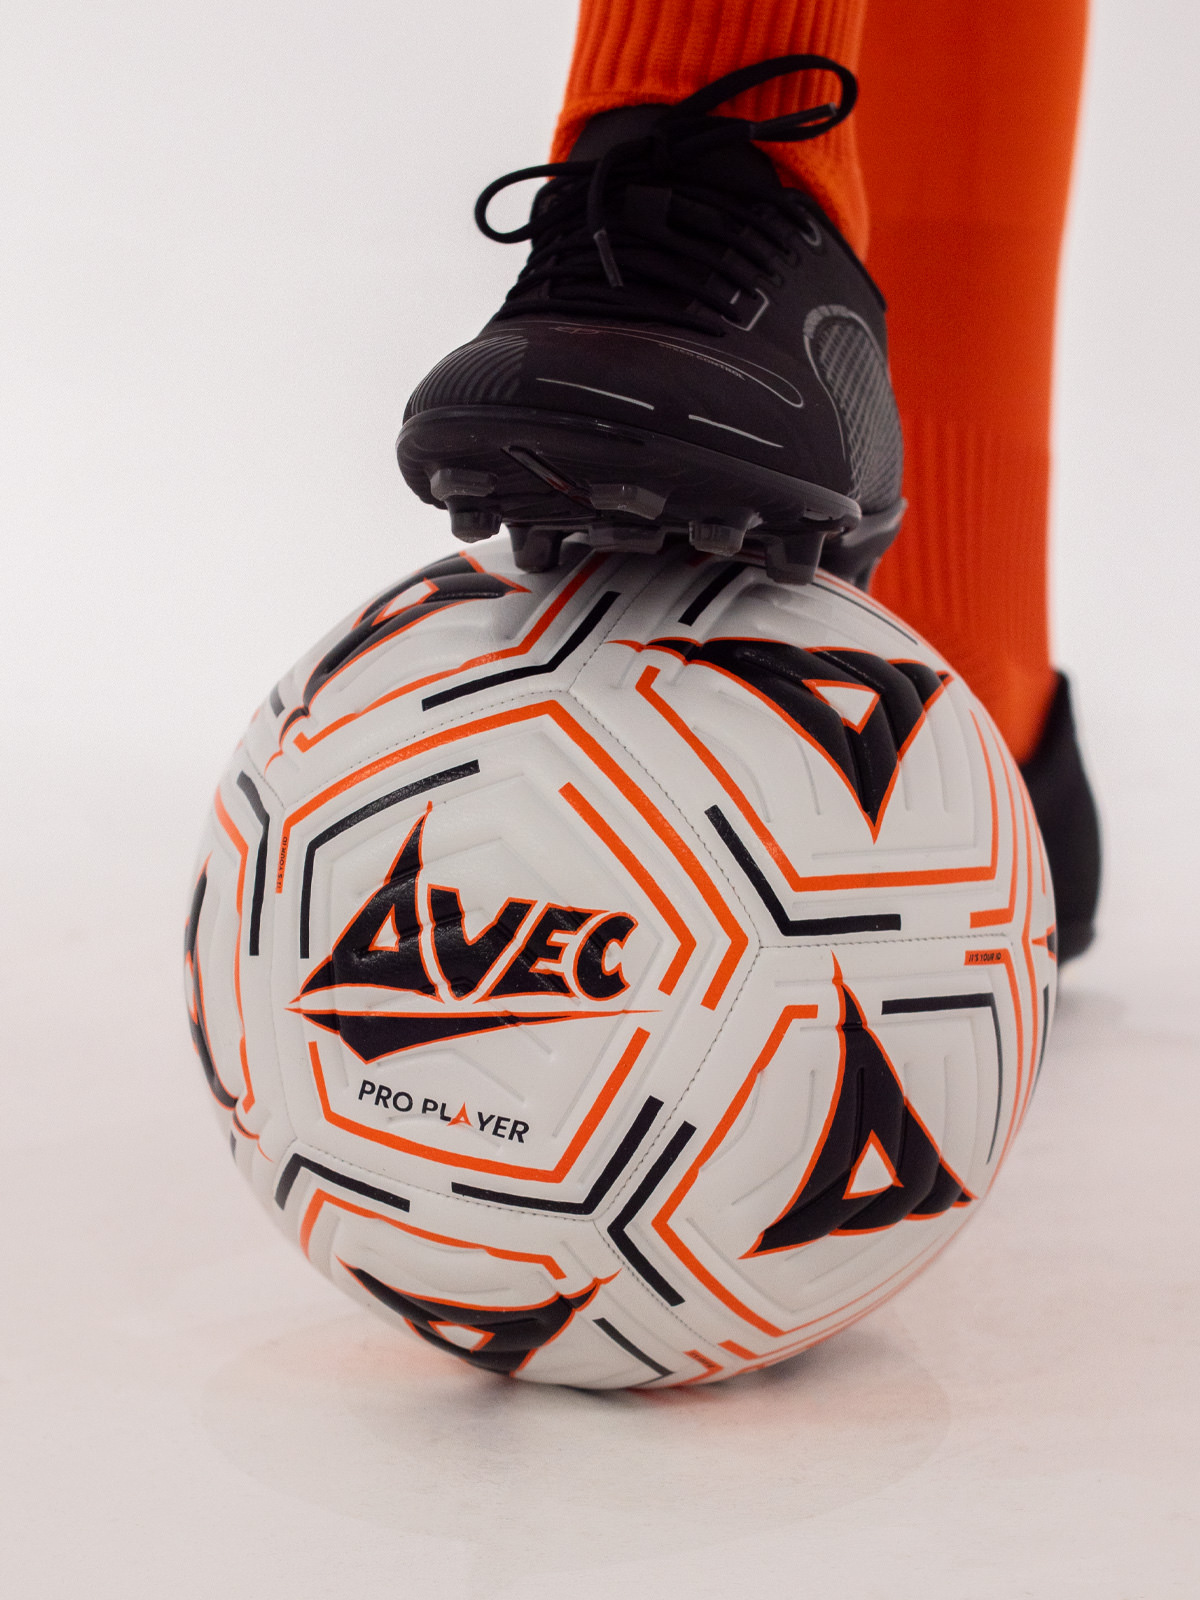 image of the avec football with black and orange graphic print design